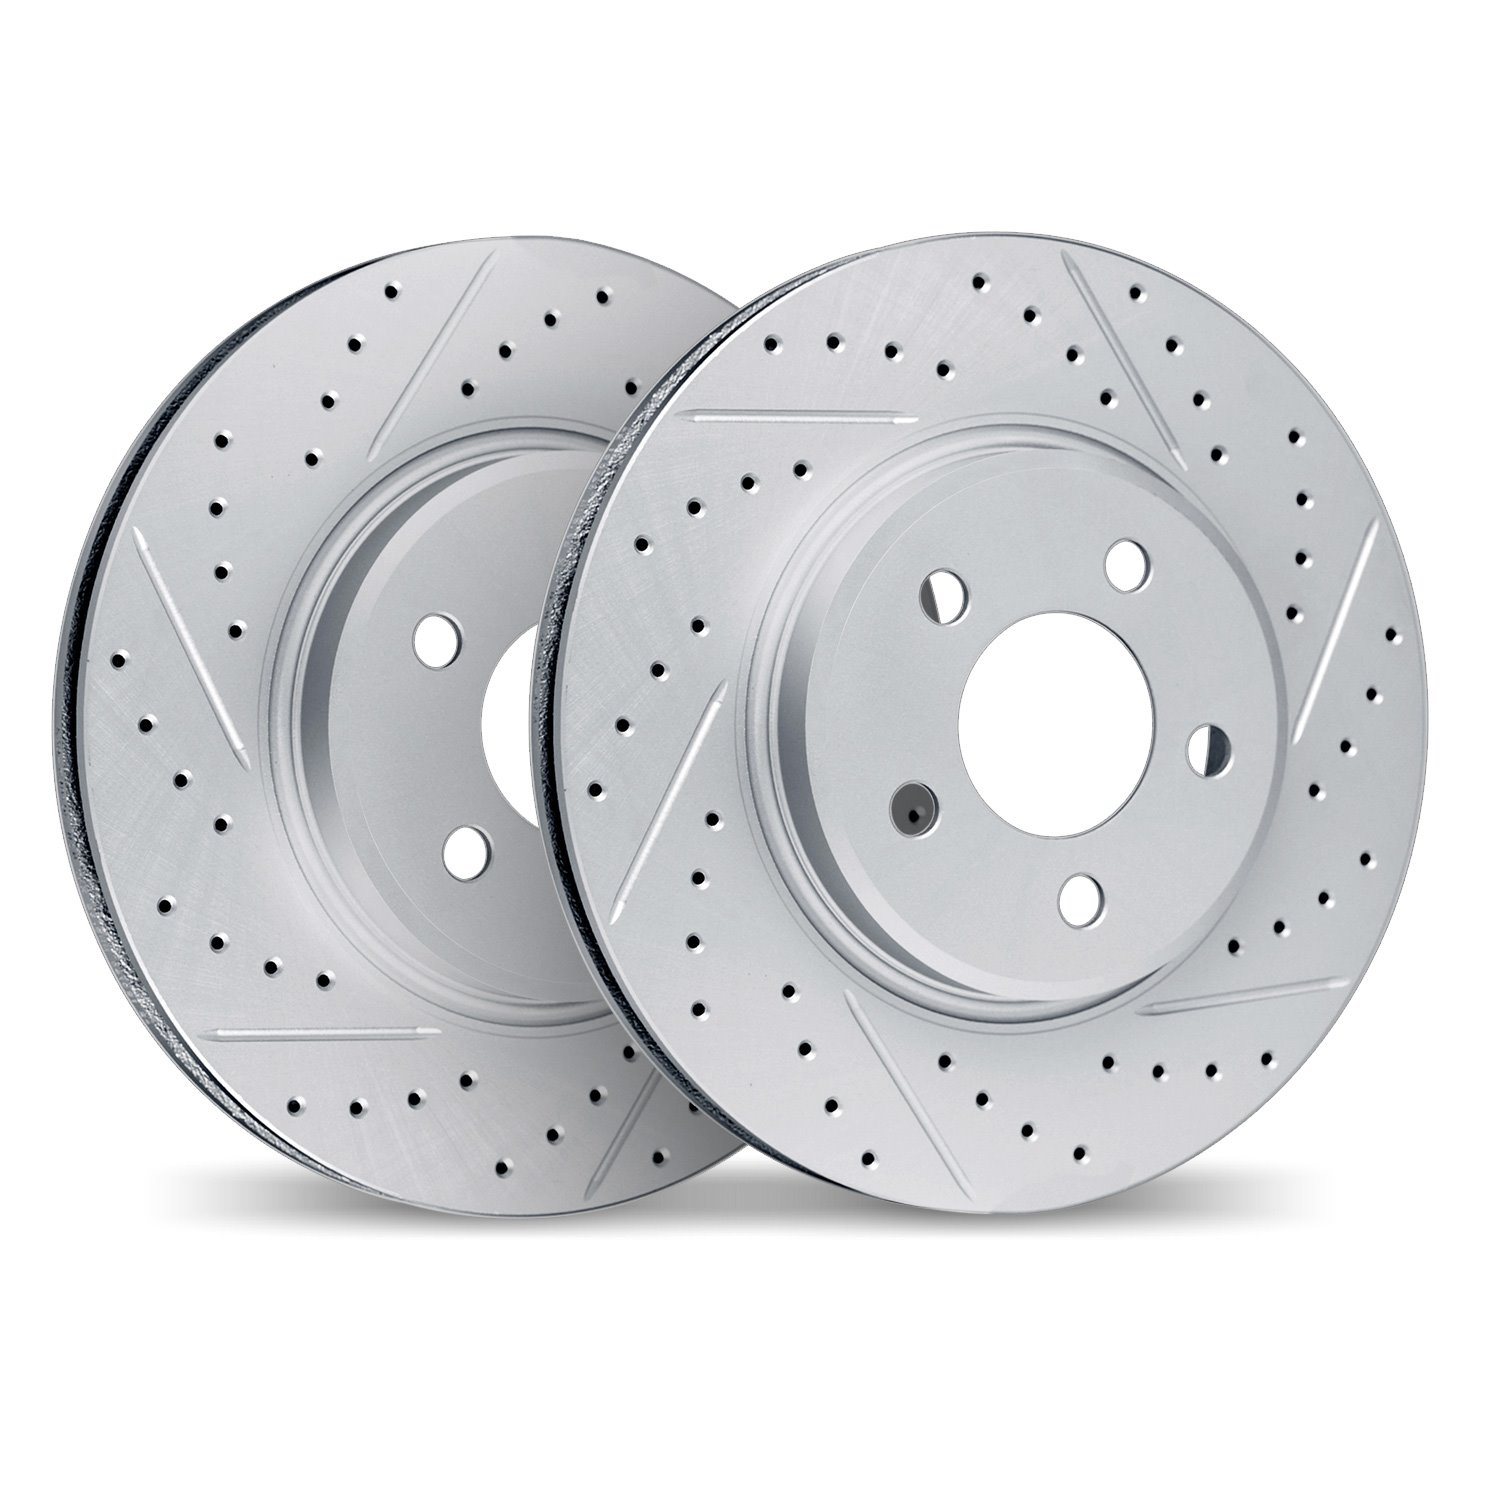 2002-32010 Geoperformance Drilled/Slotted Brake Rotors, Fits Select Mini, Position: Front